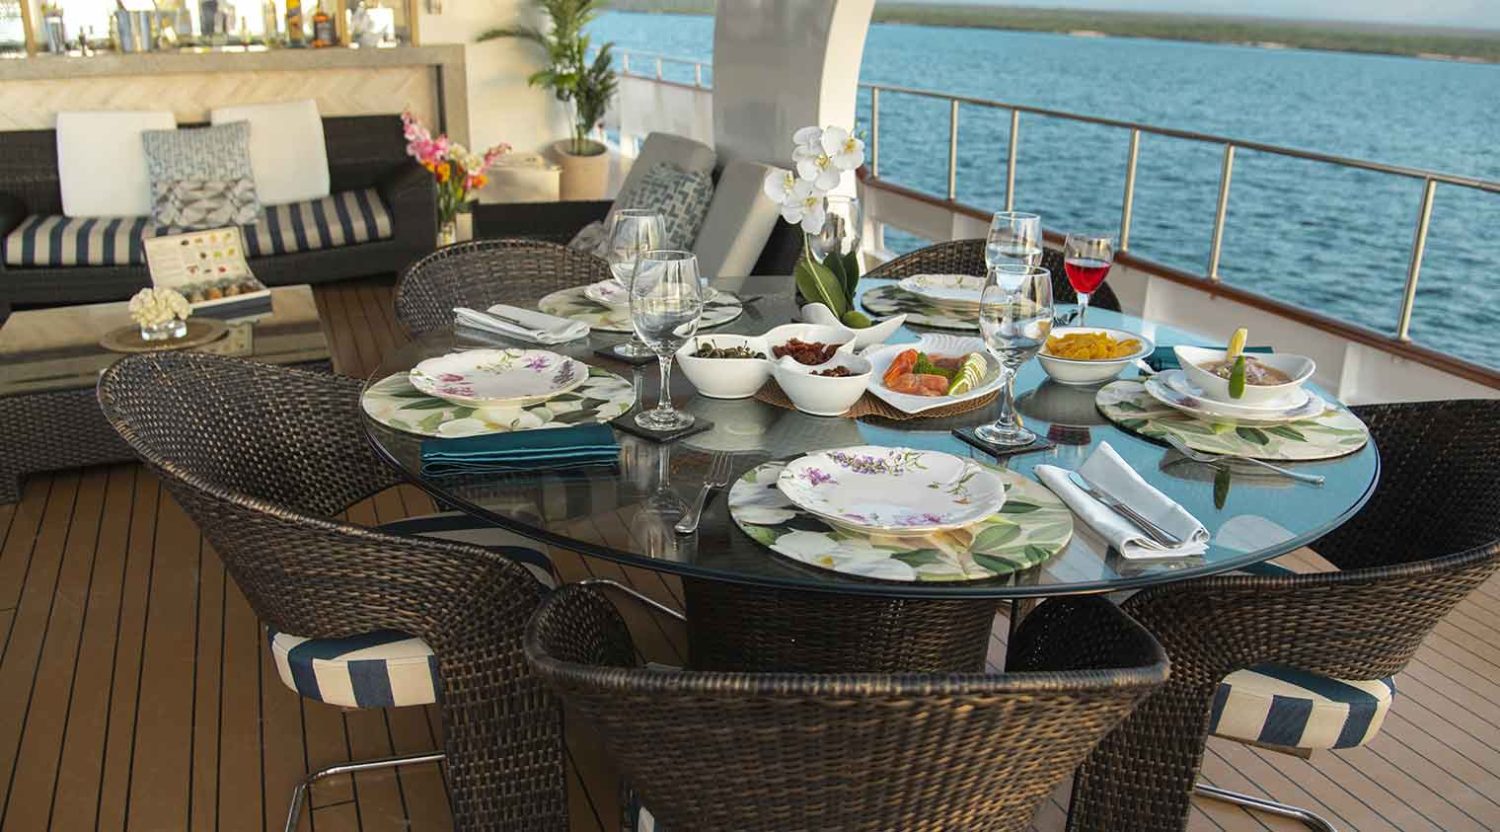 outdoor dining room of stella maris yacht of galapagos islands